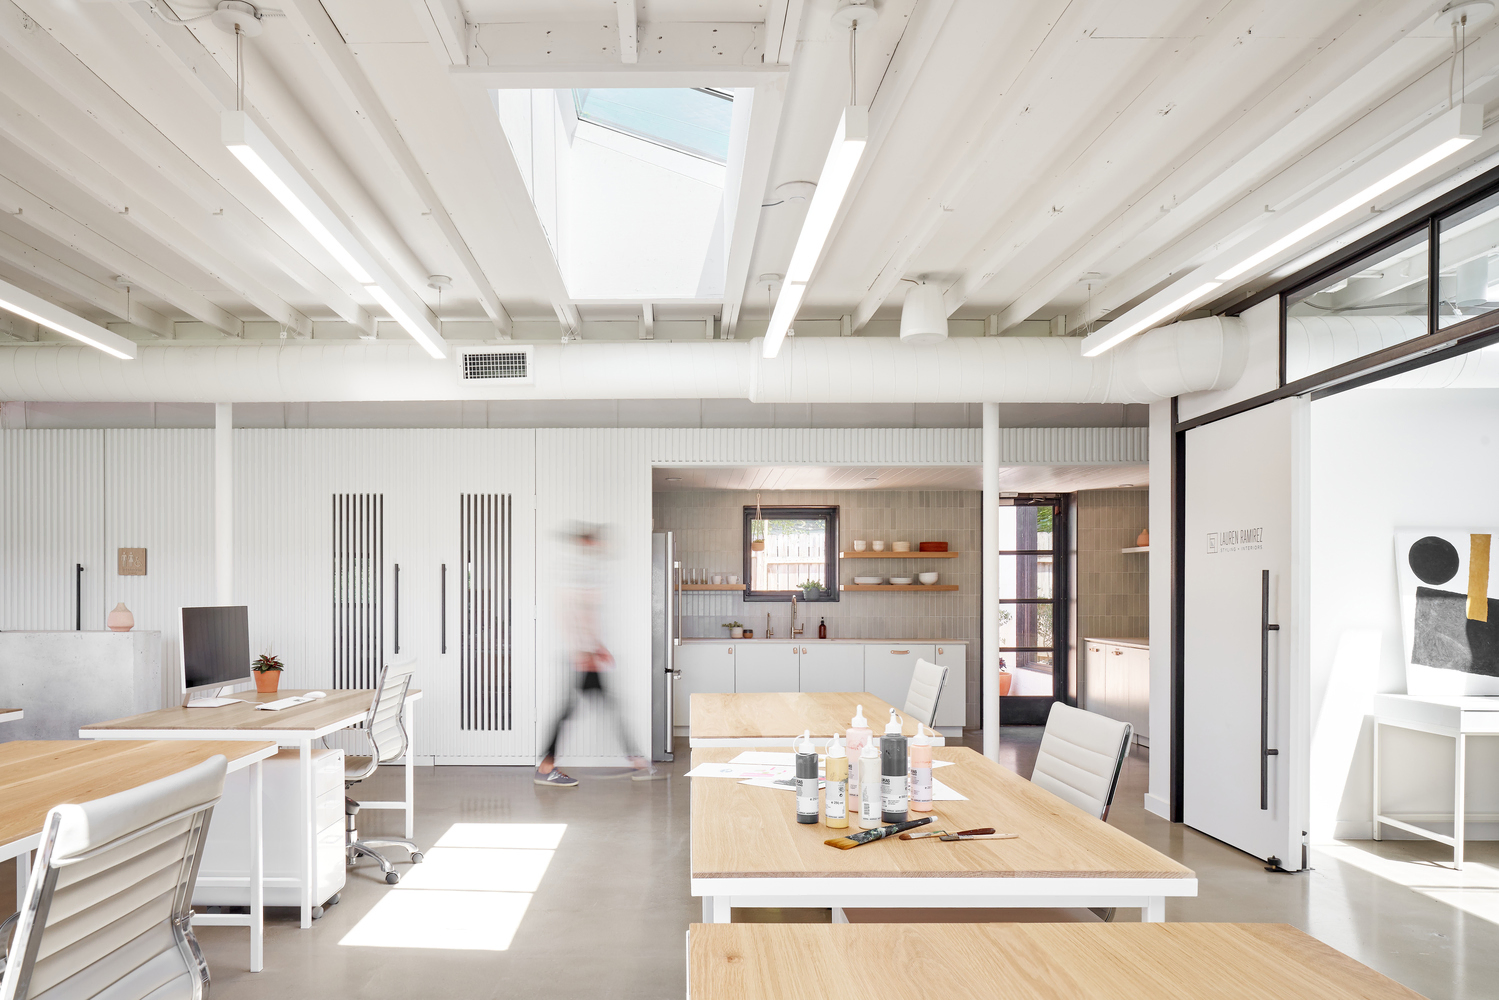 High CRI linear ceiling lights over workspaces in a creative coworking office, providing superior color rendering for graphic designers and artists.